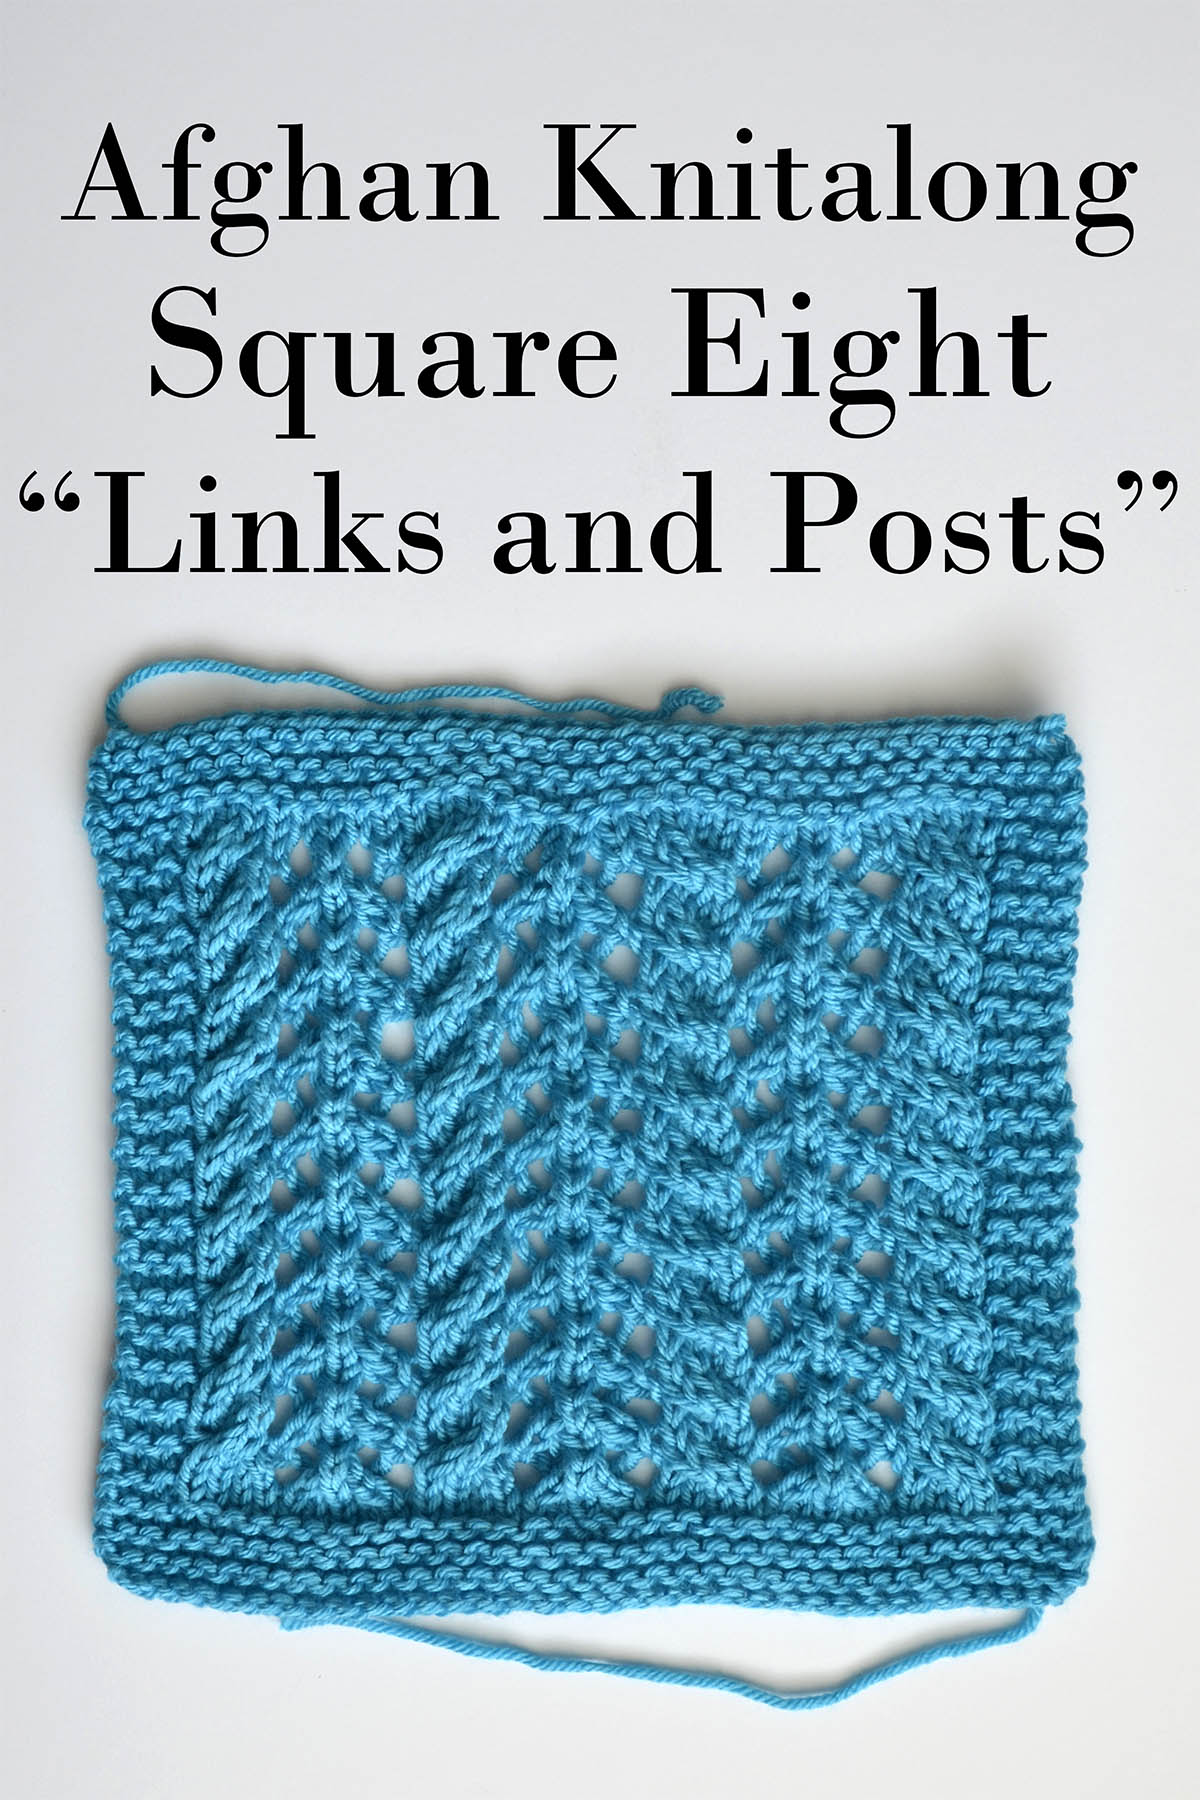 8 Posts and Links block_blog